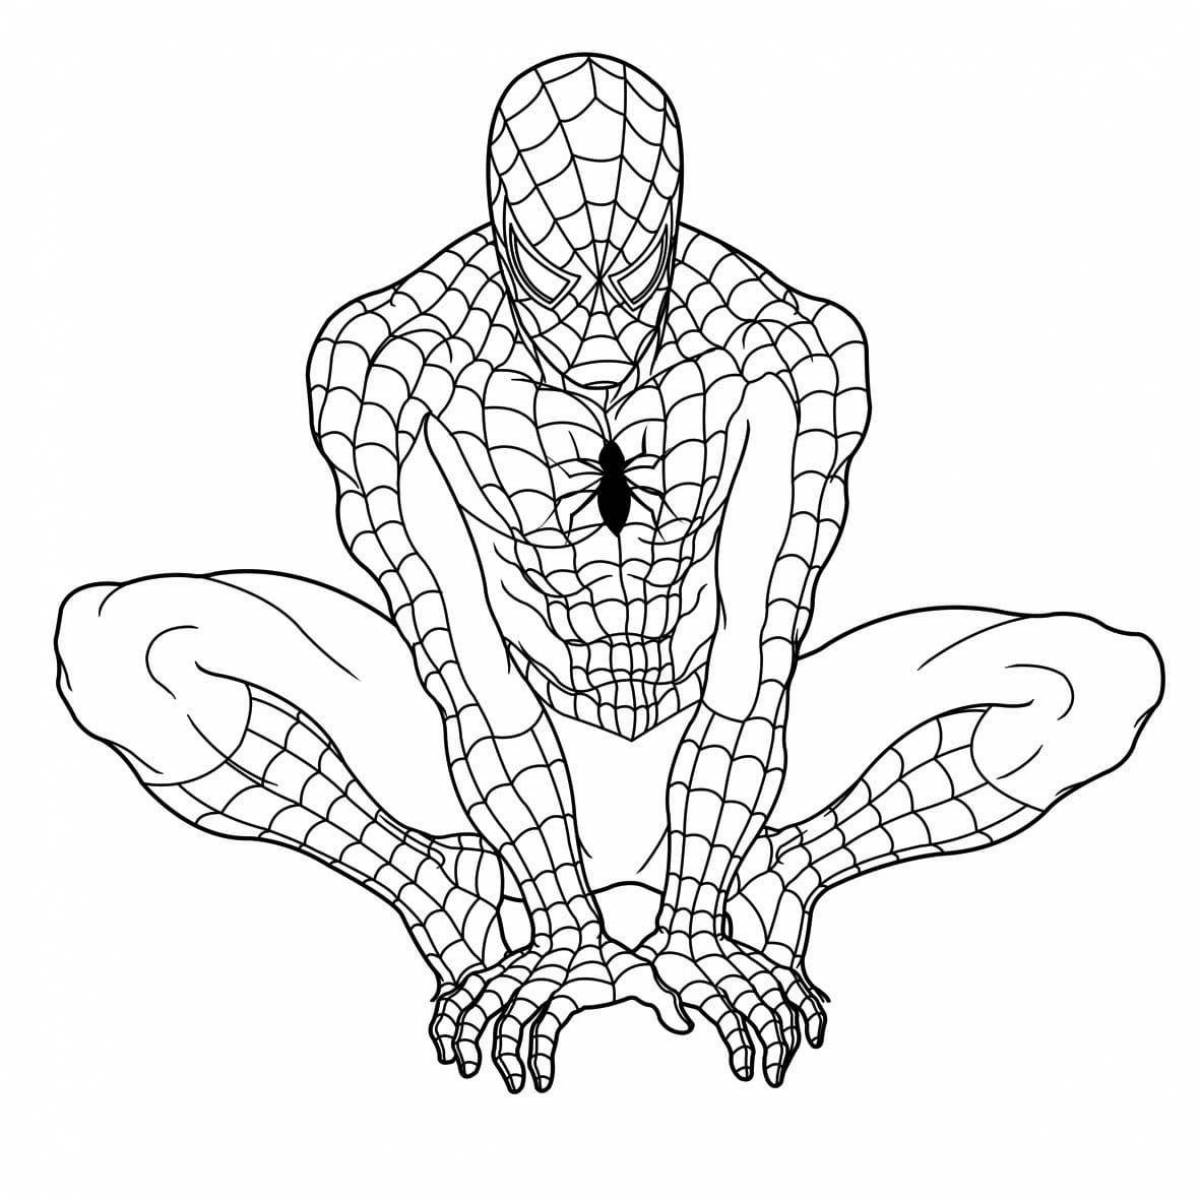 Stimulating zombie spiderman coloring page